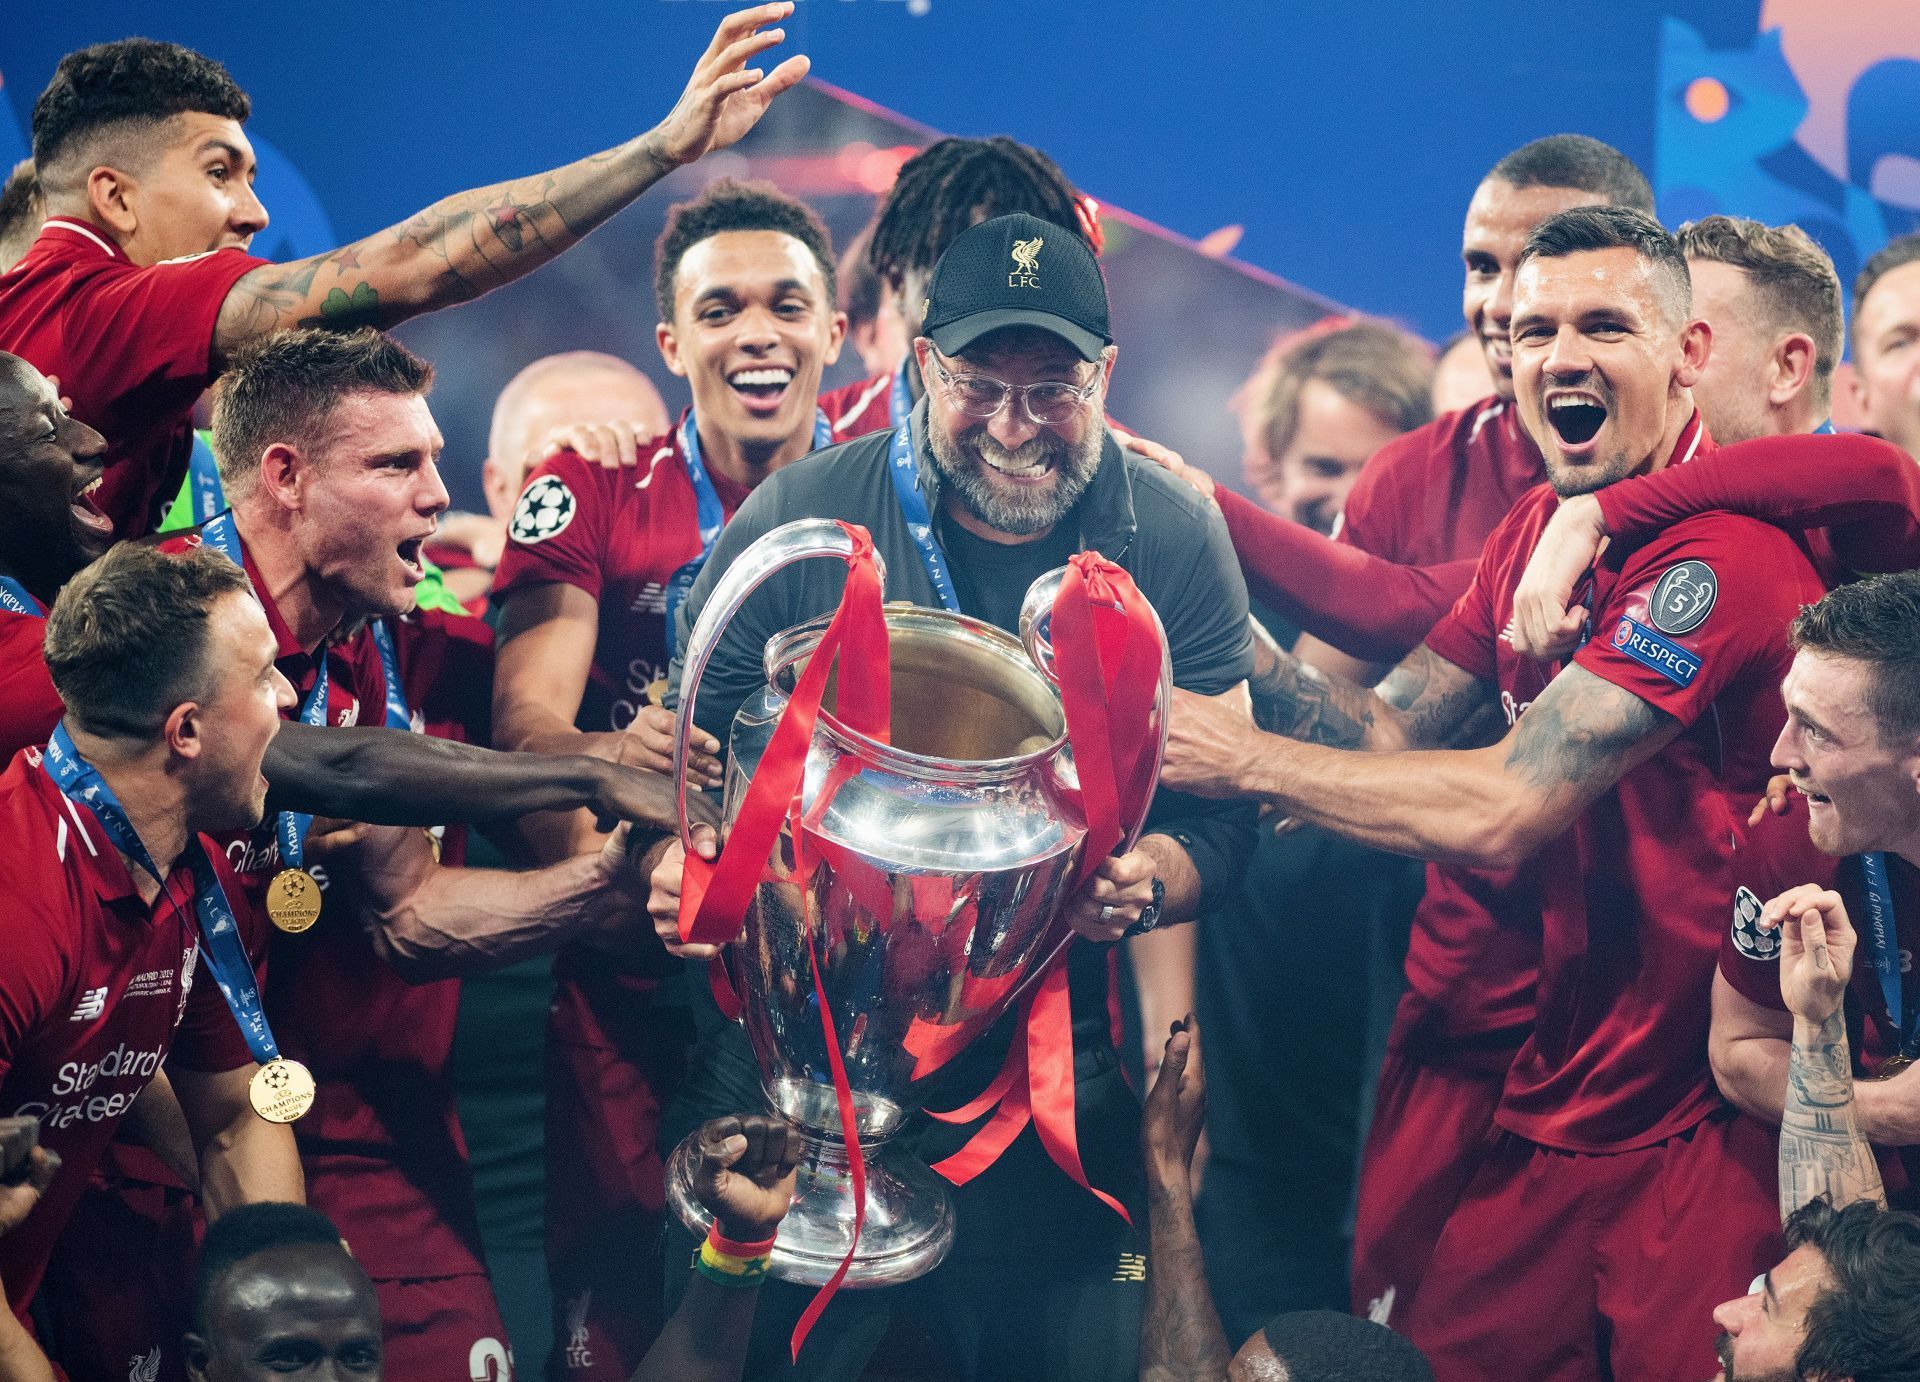 Liverpool lost the final in 2018, but claimed the trophy in 2019